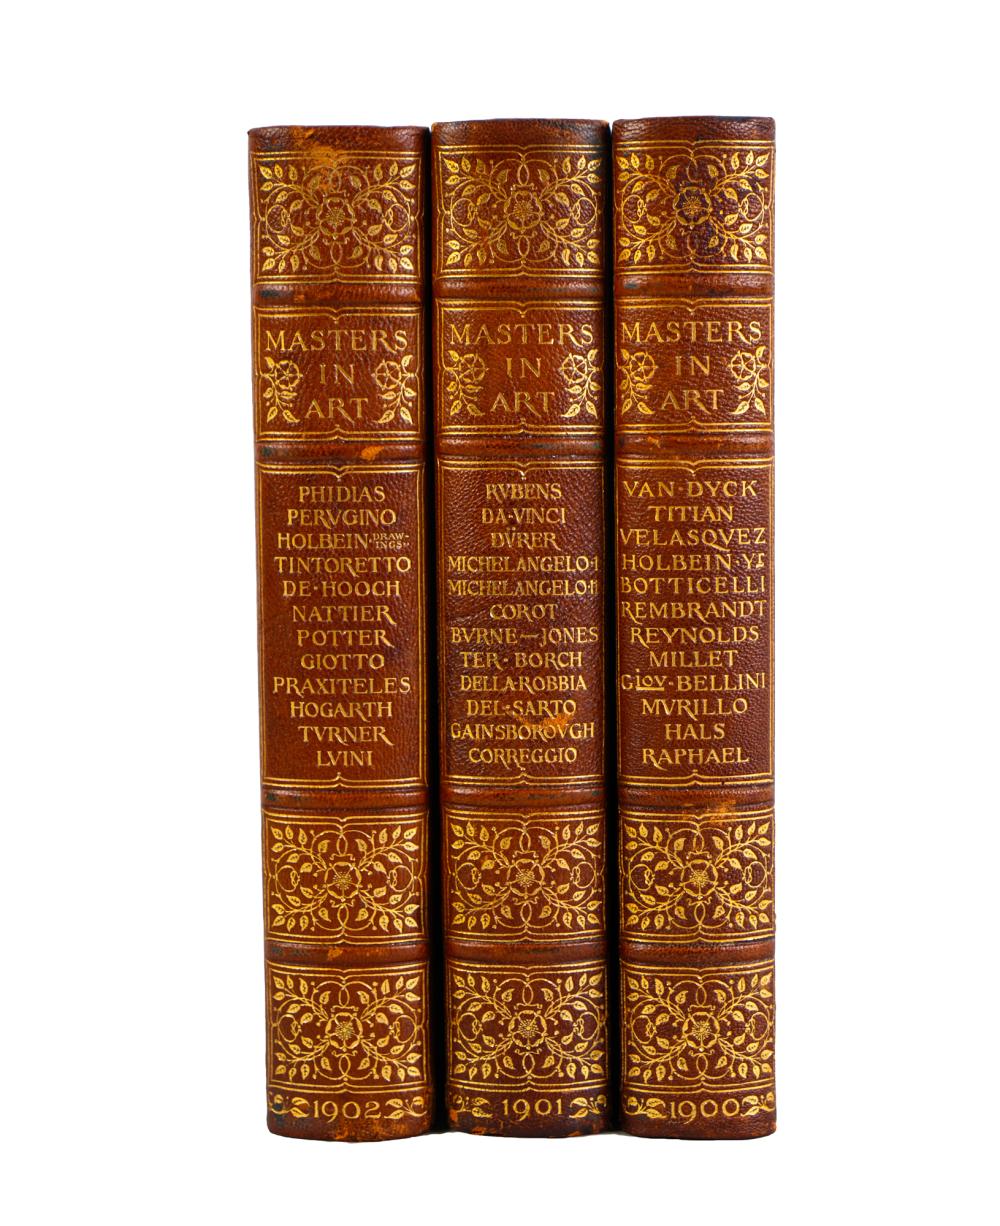 THREE VOLUMES MASTERS IN ART Masters 336664